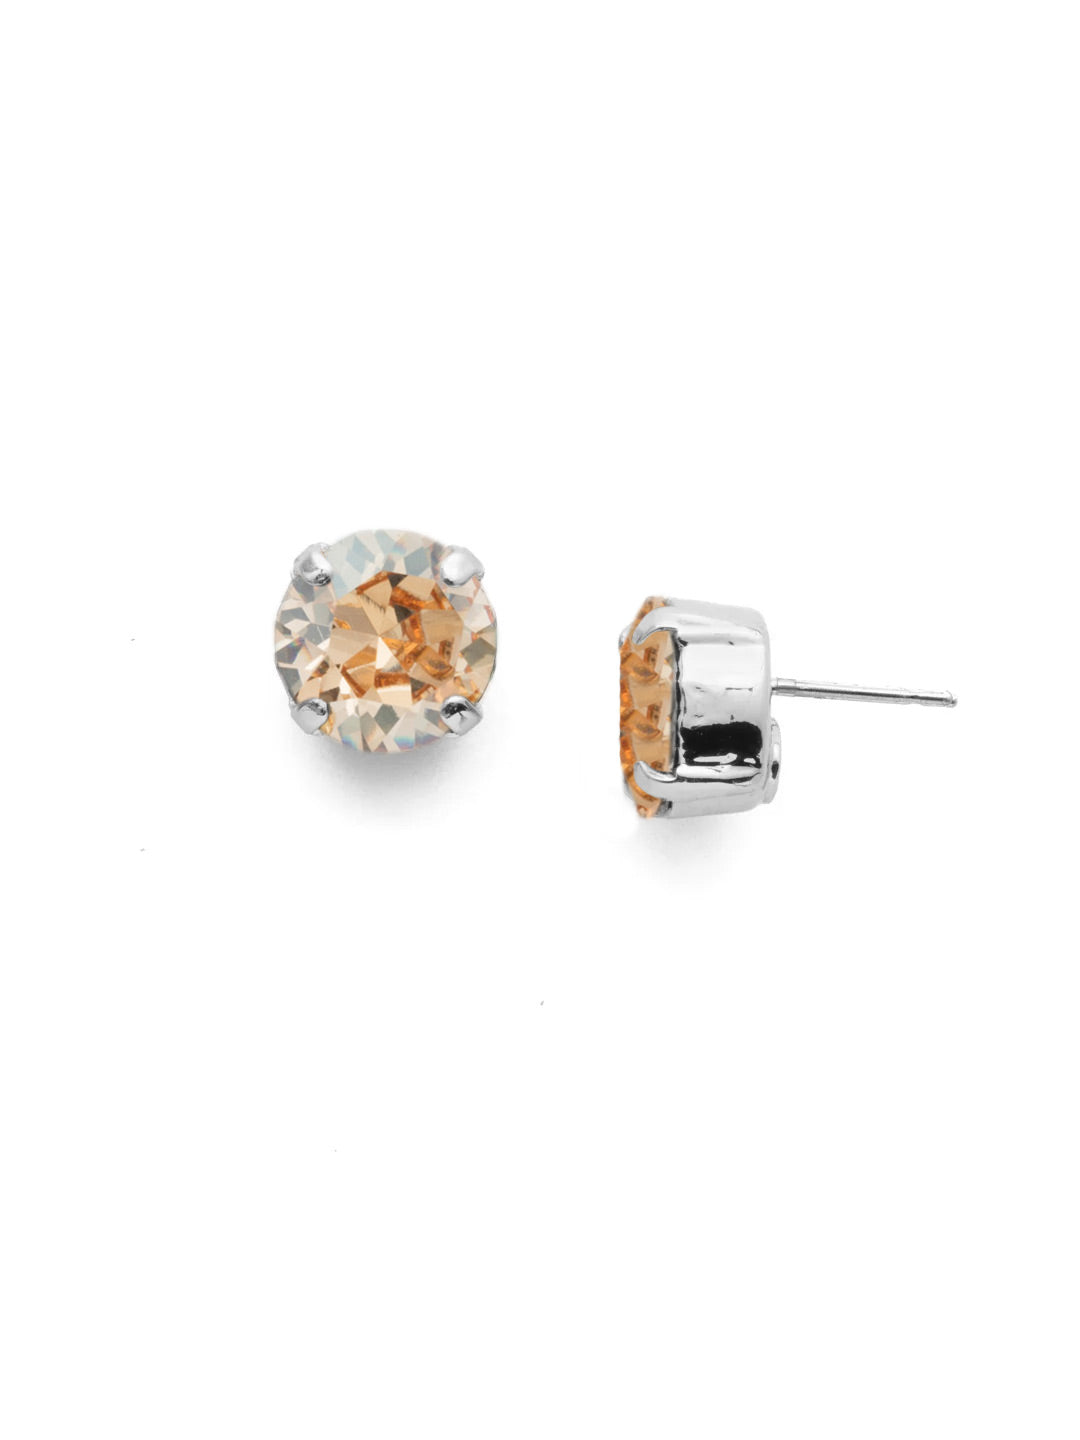 London Stud Earrings - ECM14PDDCH - <p>Everyone needs a great pair of studs. Add some classic sparkle to any occasion with these stud earrings. Need help picking a stud? <a href="https://www.sorrelli.com/blogs/sisterhood/round-stud-earrings-101-a-rundown-of-sizes-styles-and-sparkle">Check out our size guide!</a> From Sorrelli's Dark Champagne collection in our Palladium finish.</p>